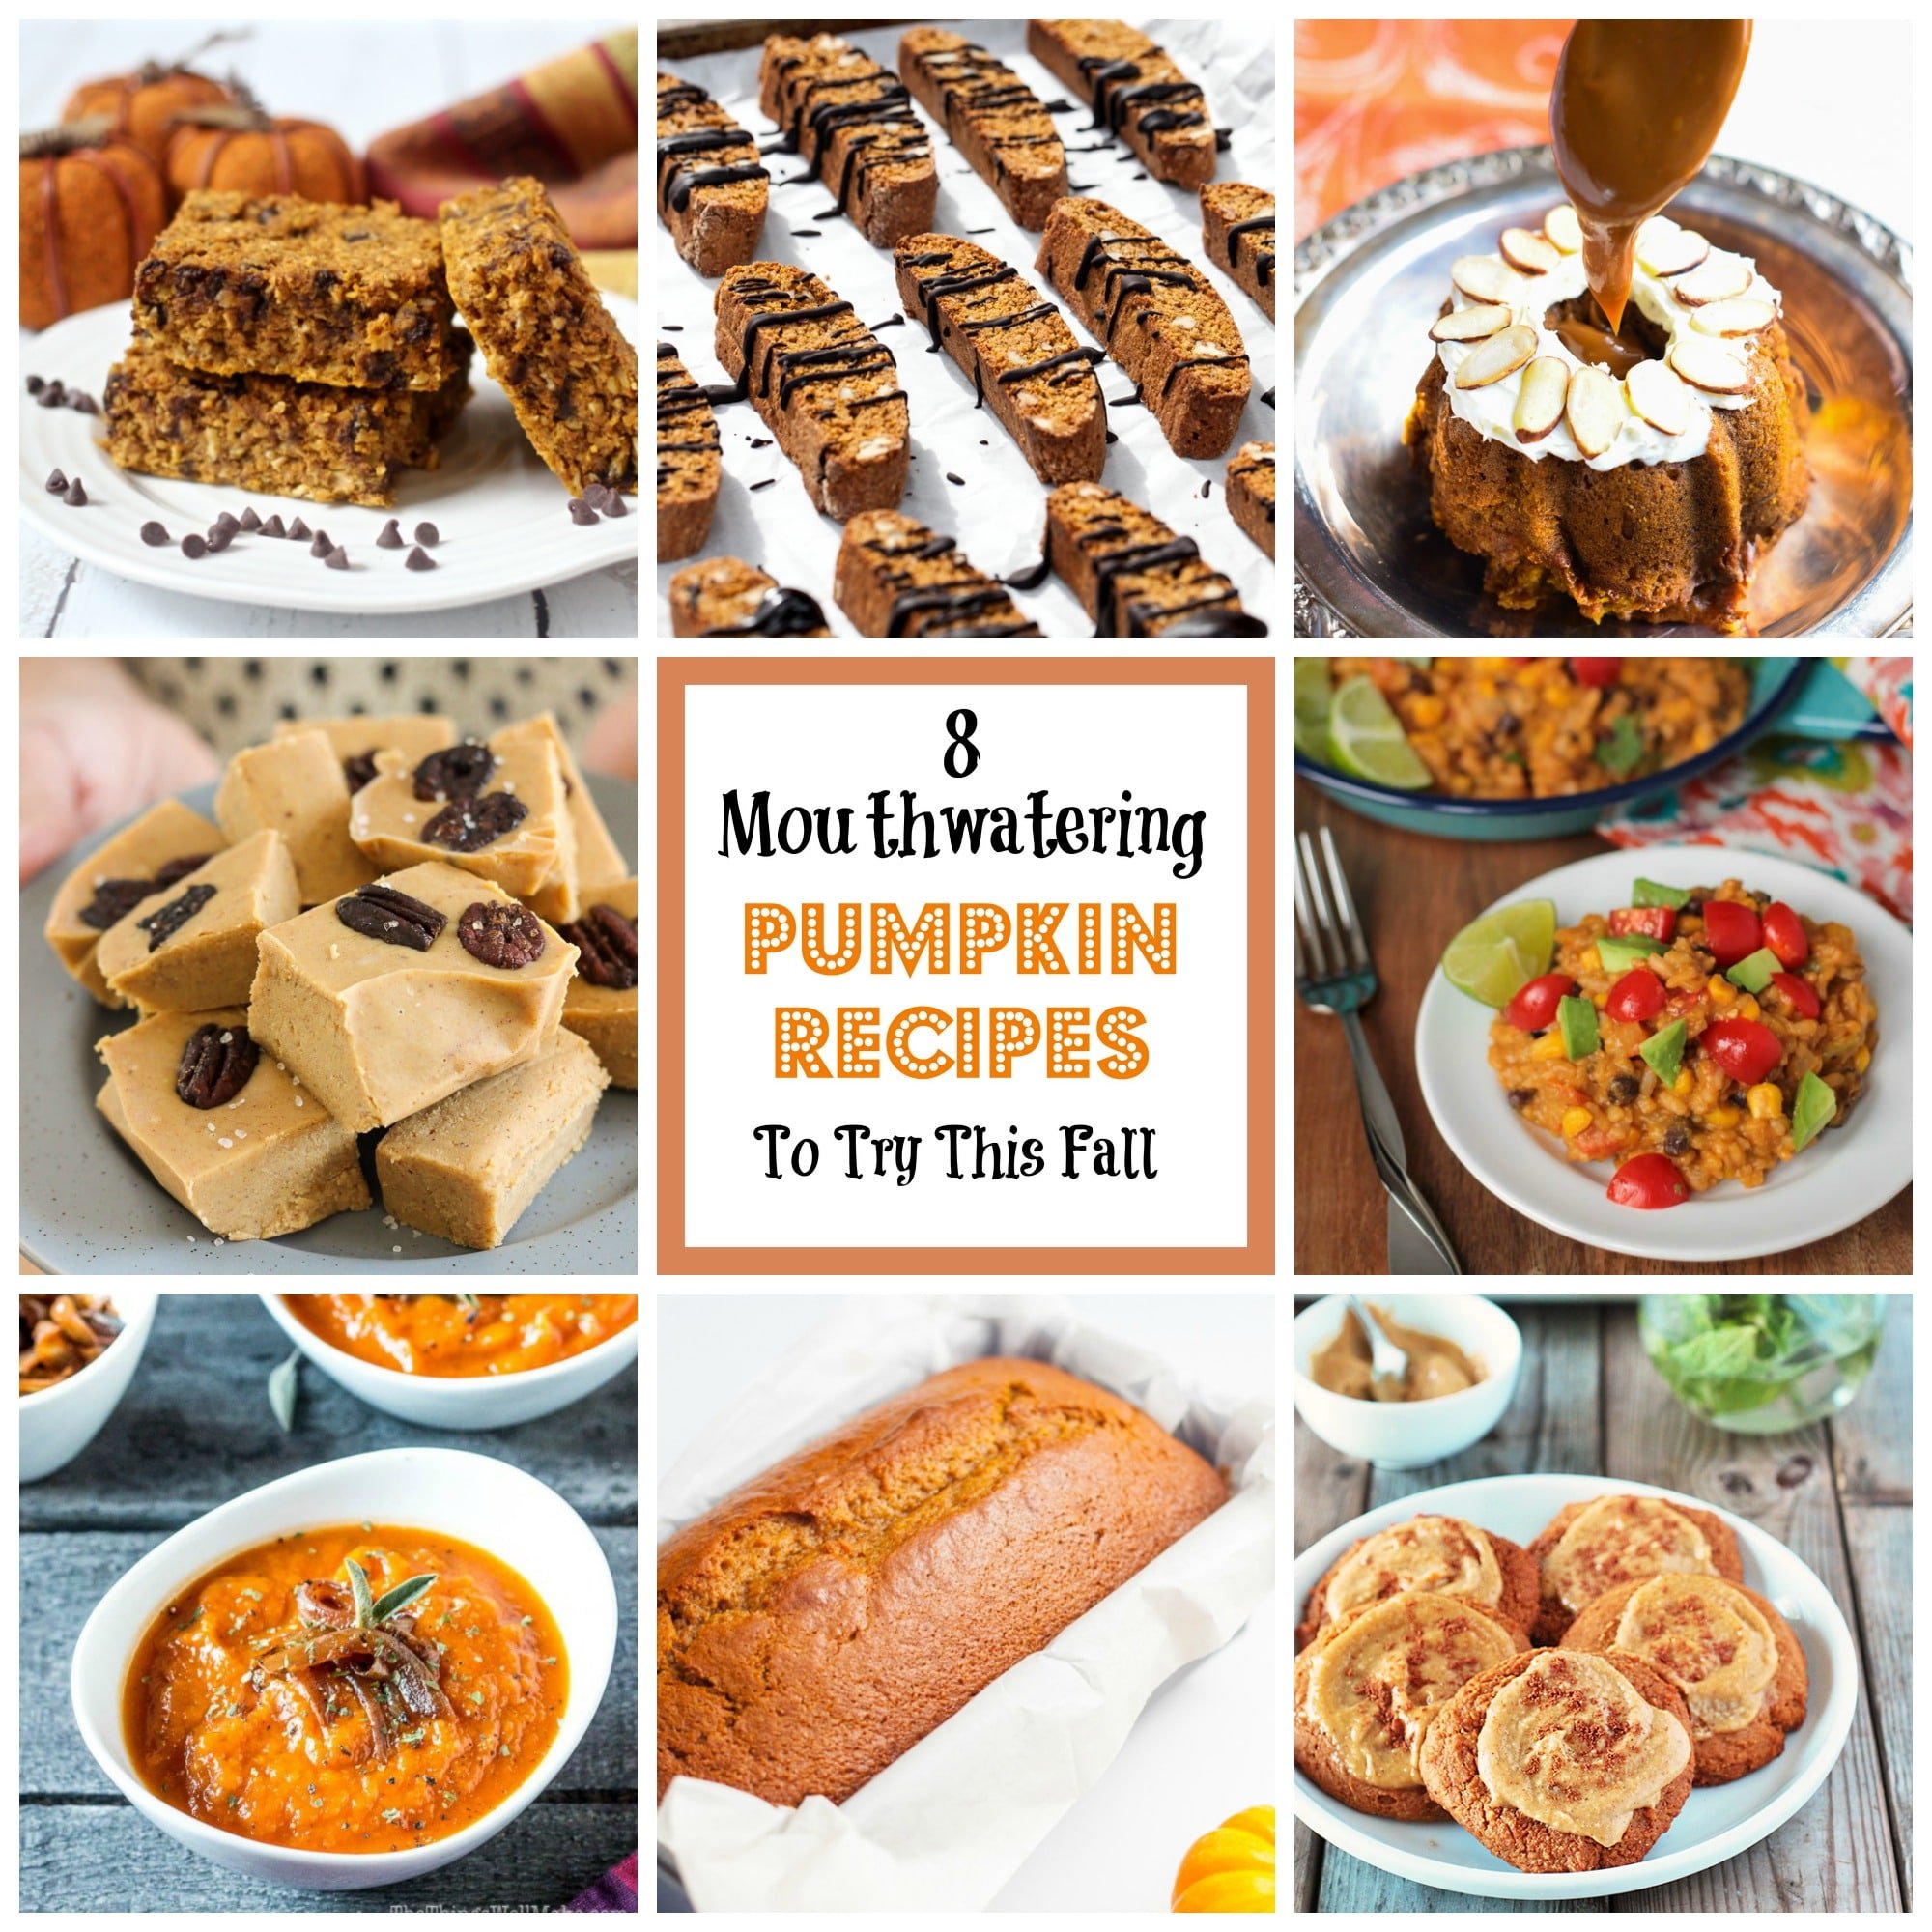 8 Mouthwatering Pumpkin Recipes To Try This Fall